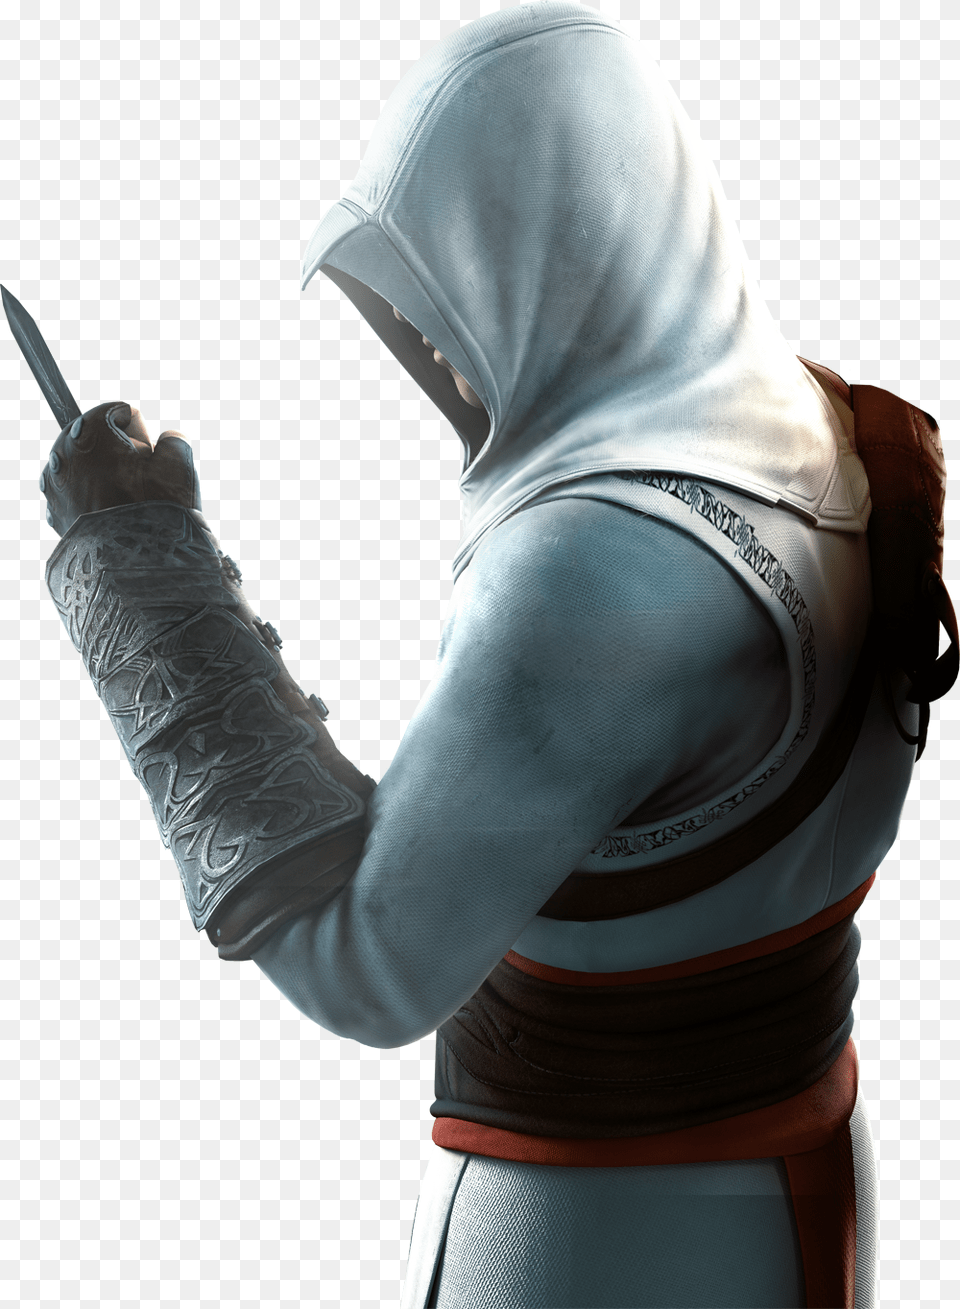 Altair Assassins Creed Image For Designing Assassins Creed Transparent, Clothing, Glove, Adult, Body Part Free Png Download